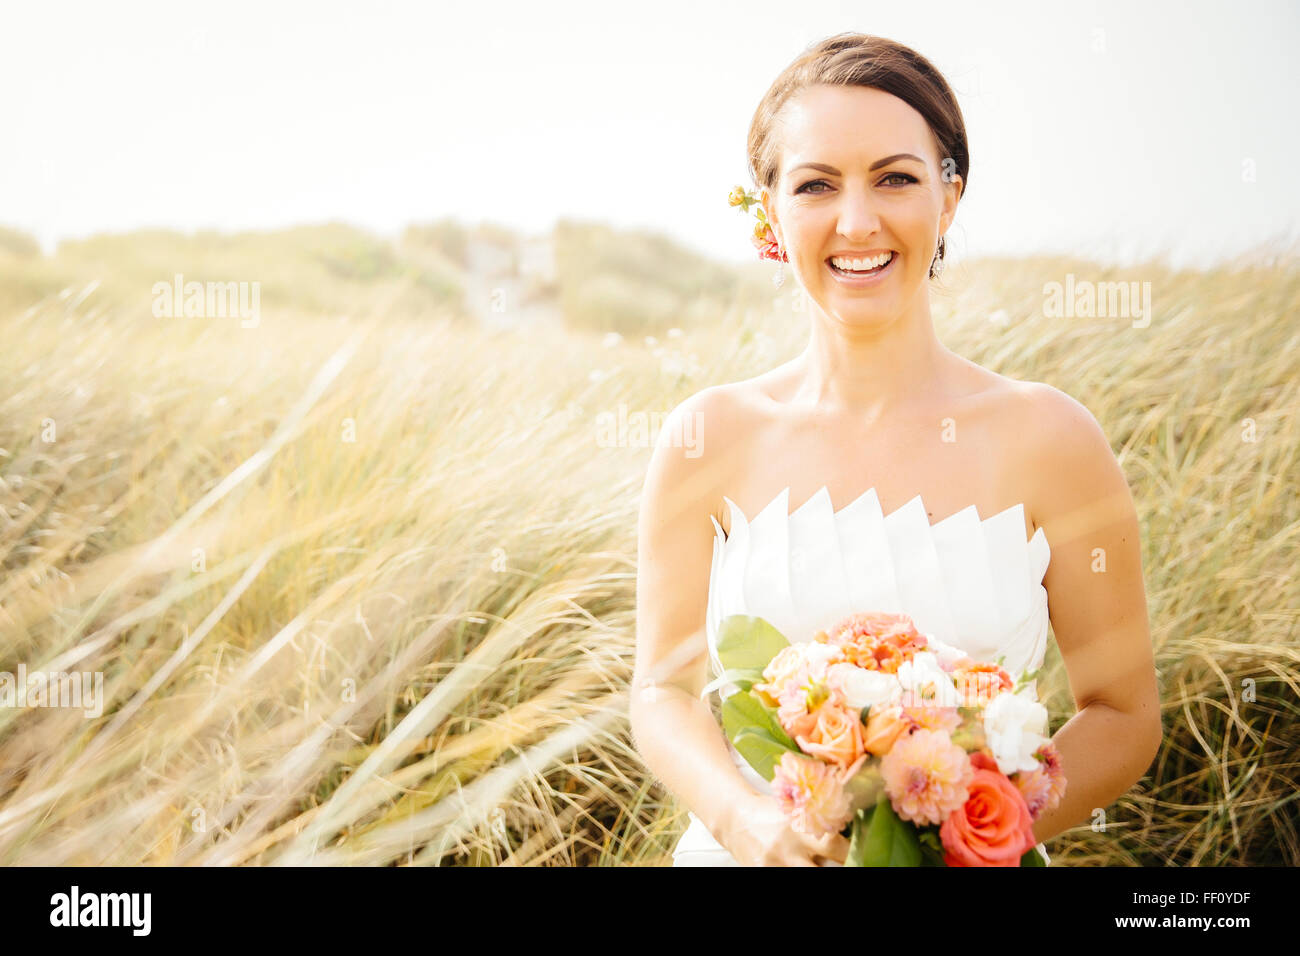 Caucasian bride standing in grass Banque D'Images